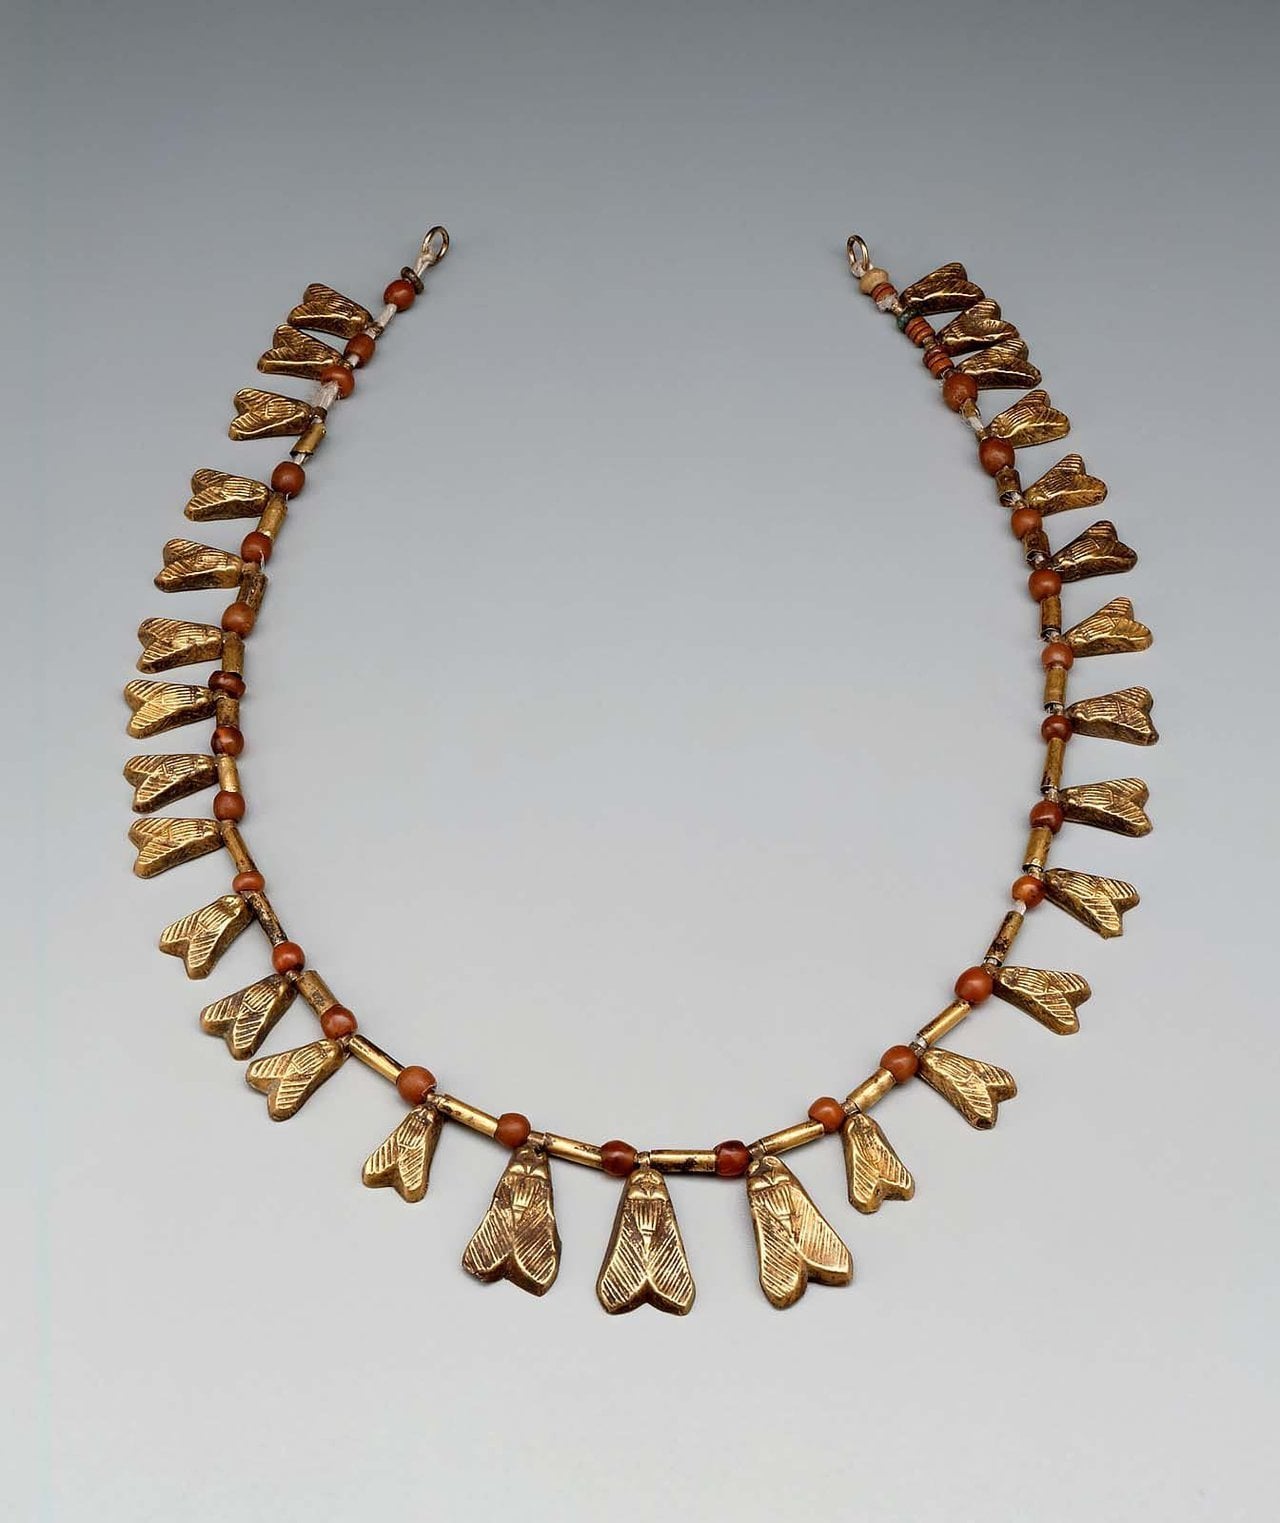 Necklace of Gold flies - Egypt Museum